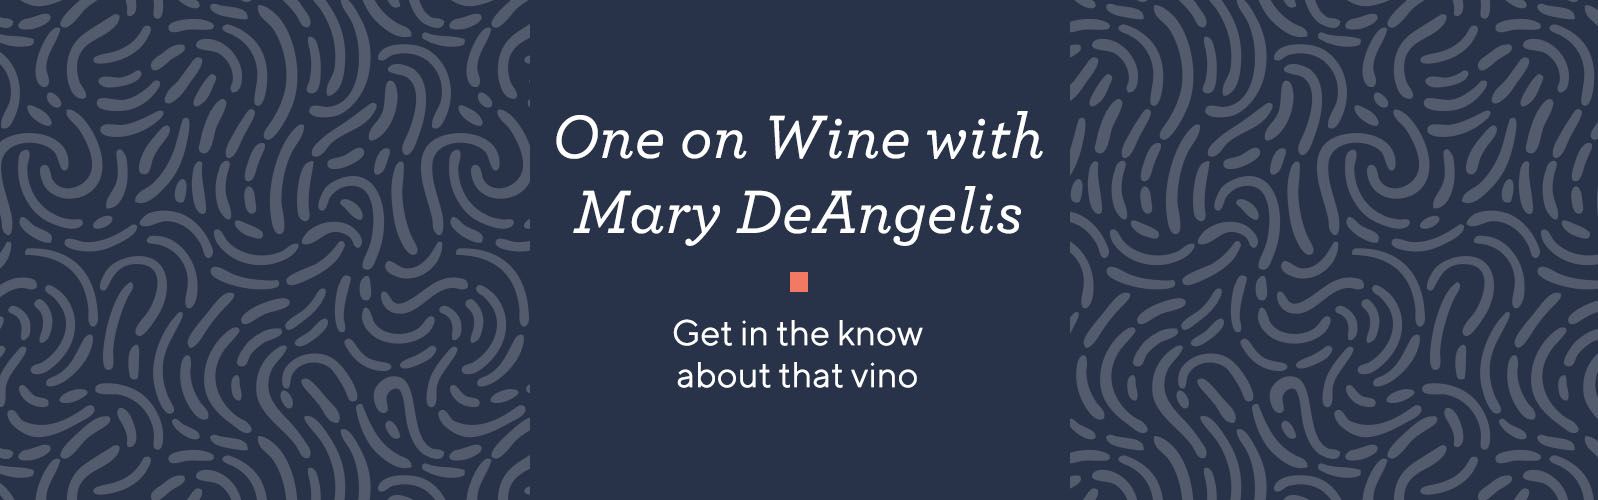 One on Wine with Mary DeAngelis  Get in the know about that vino